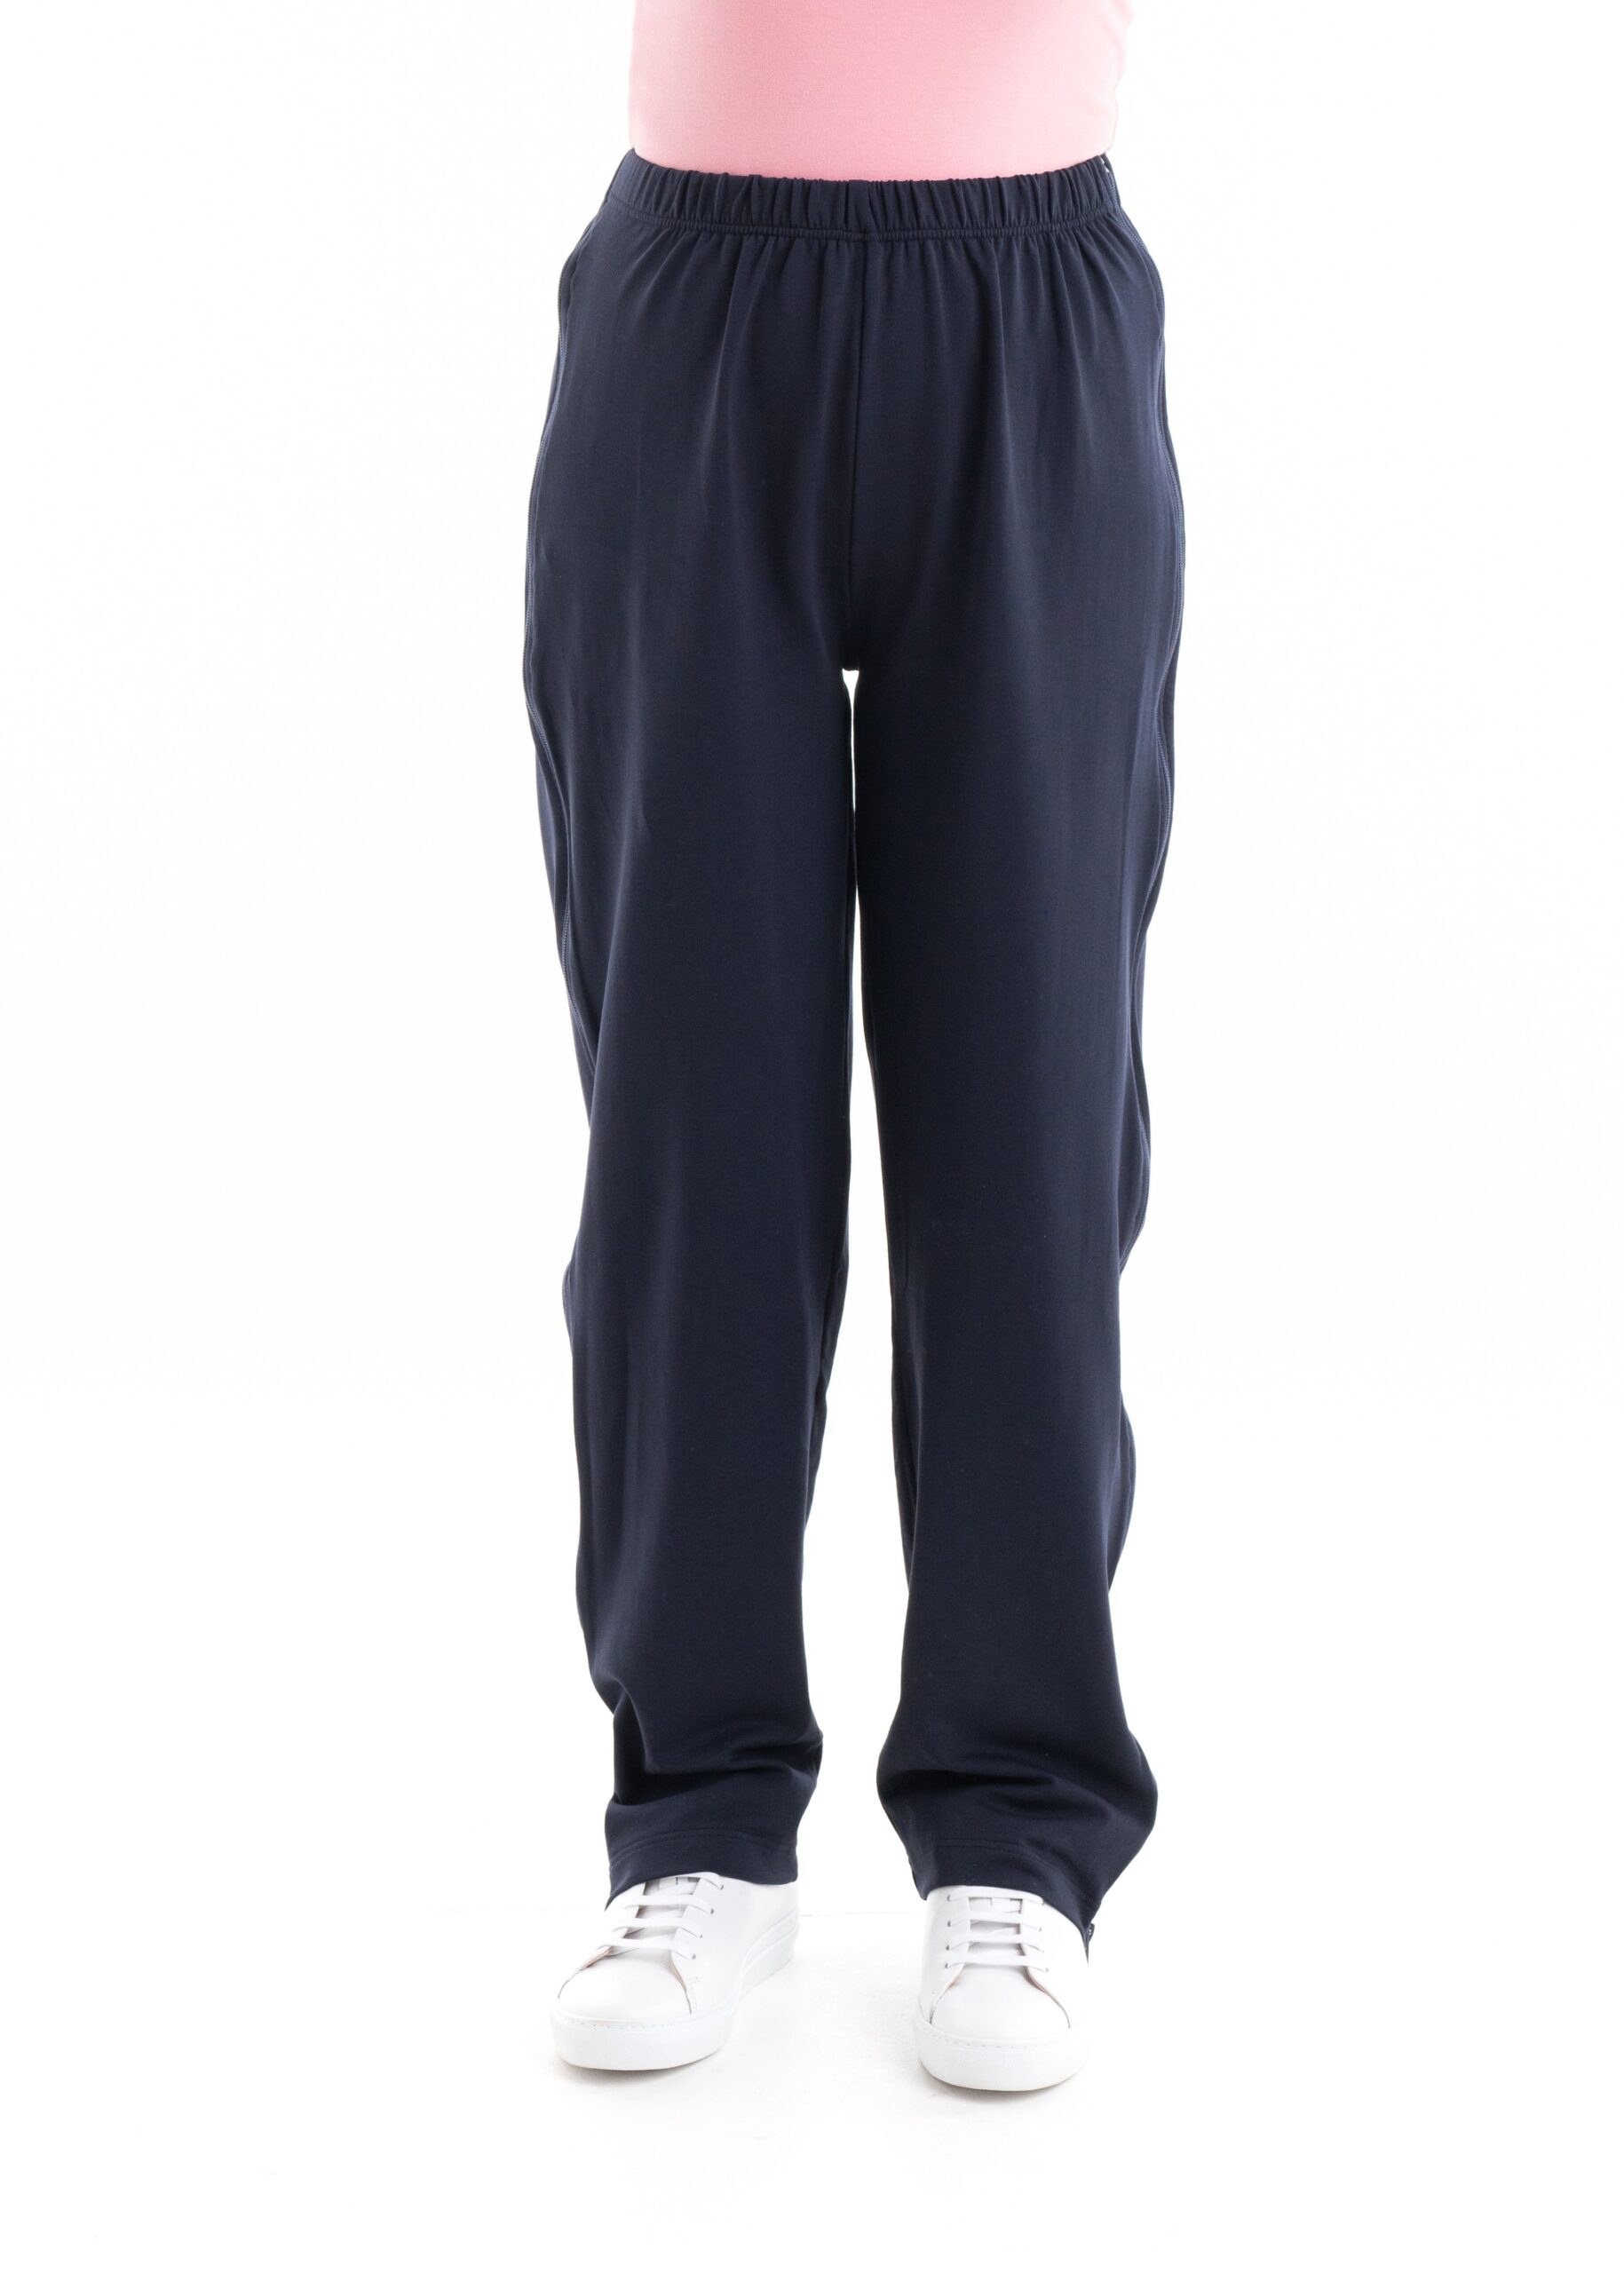 Ladies Tracksuit Bottoms with full side zips